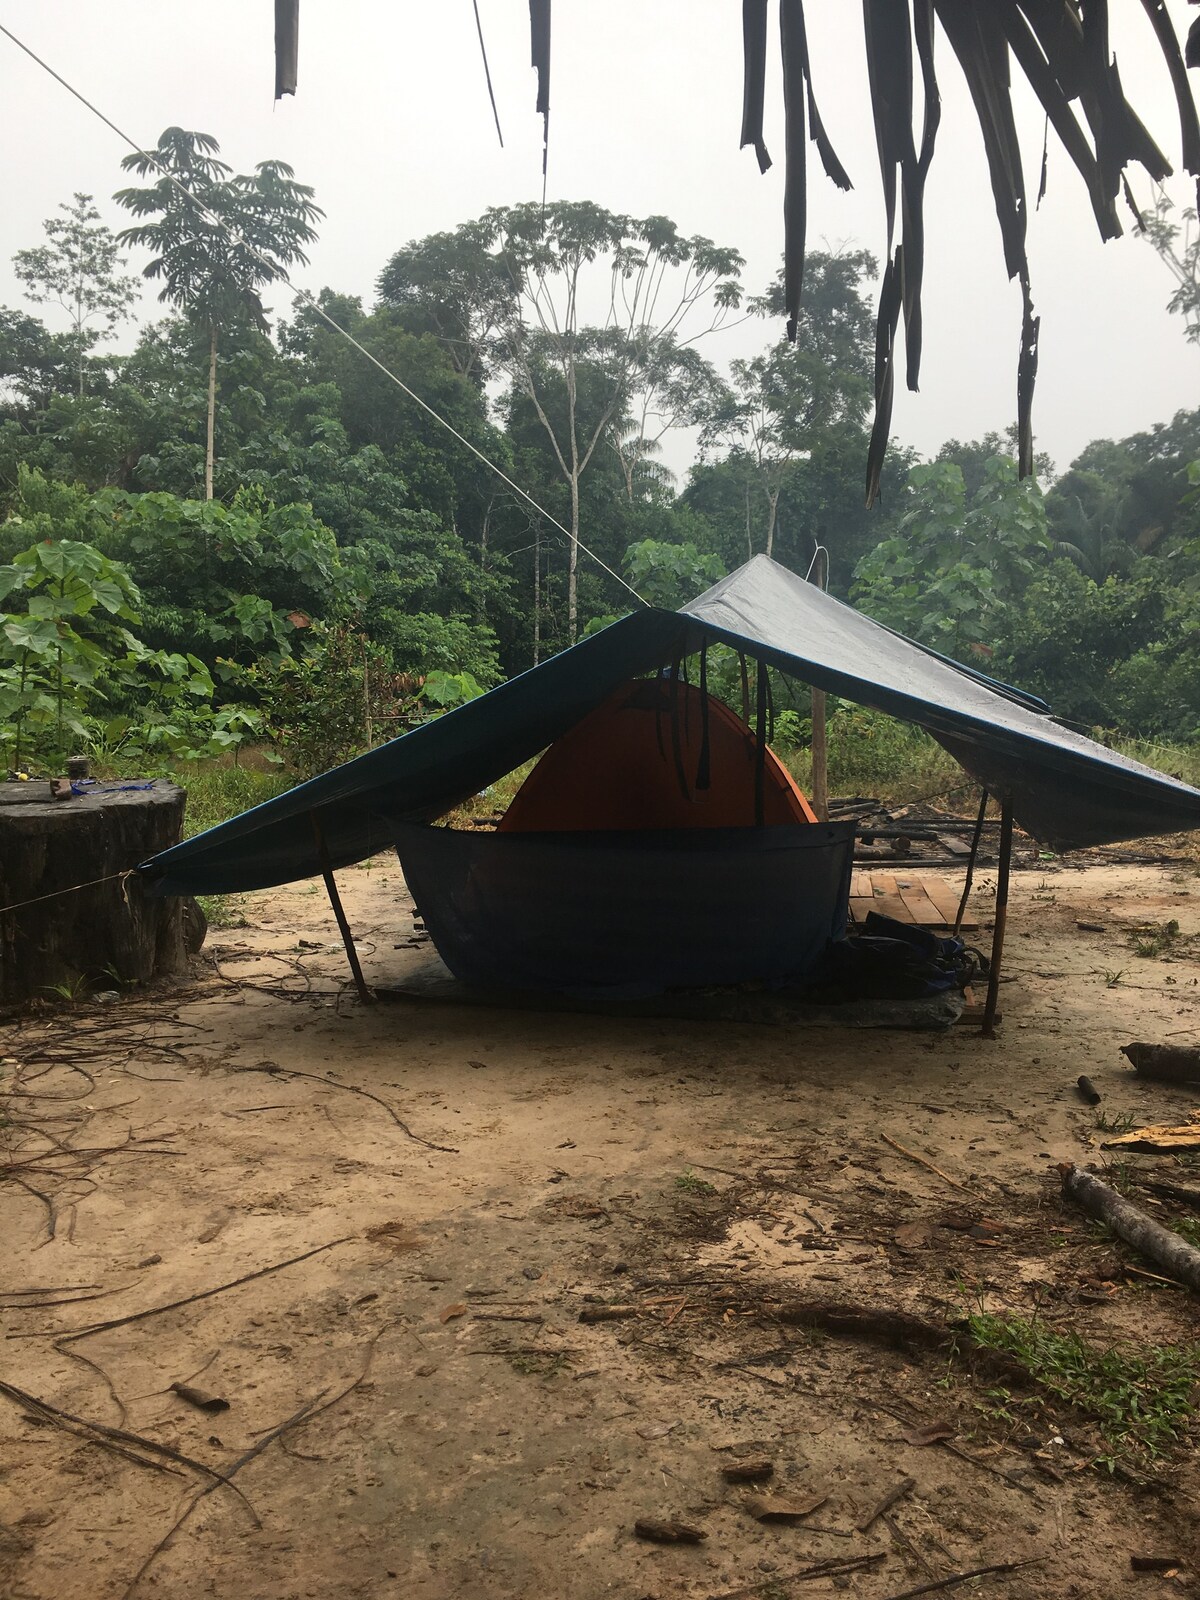 Stones Guiding Remote Amazon Expeditions